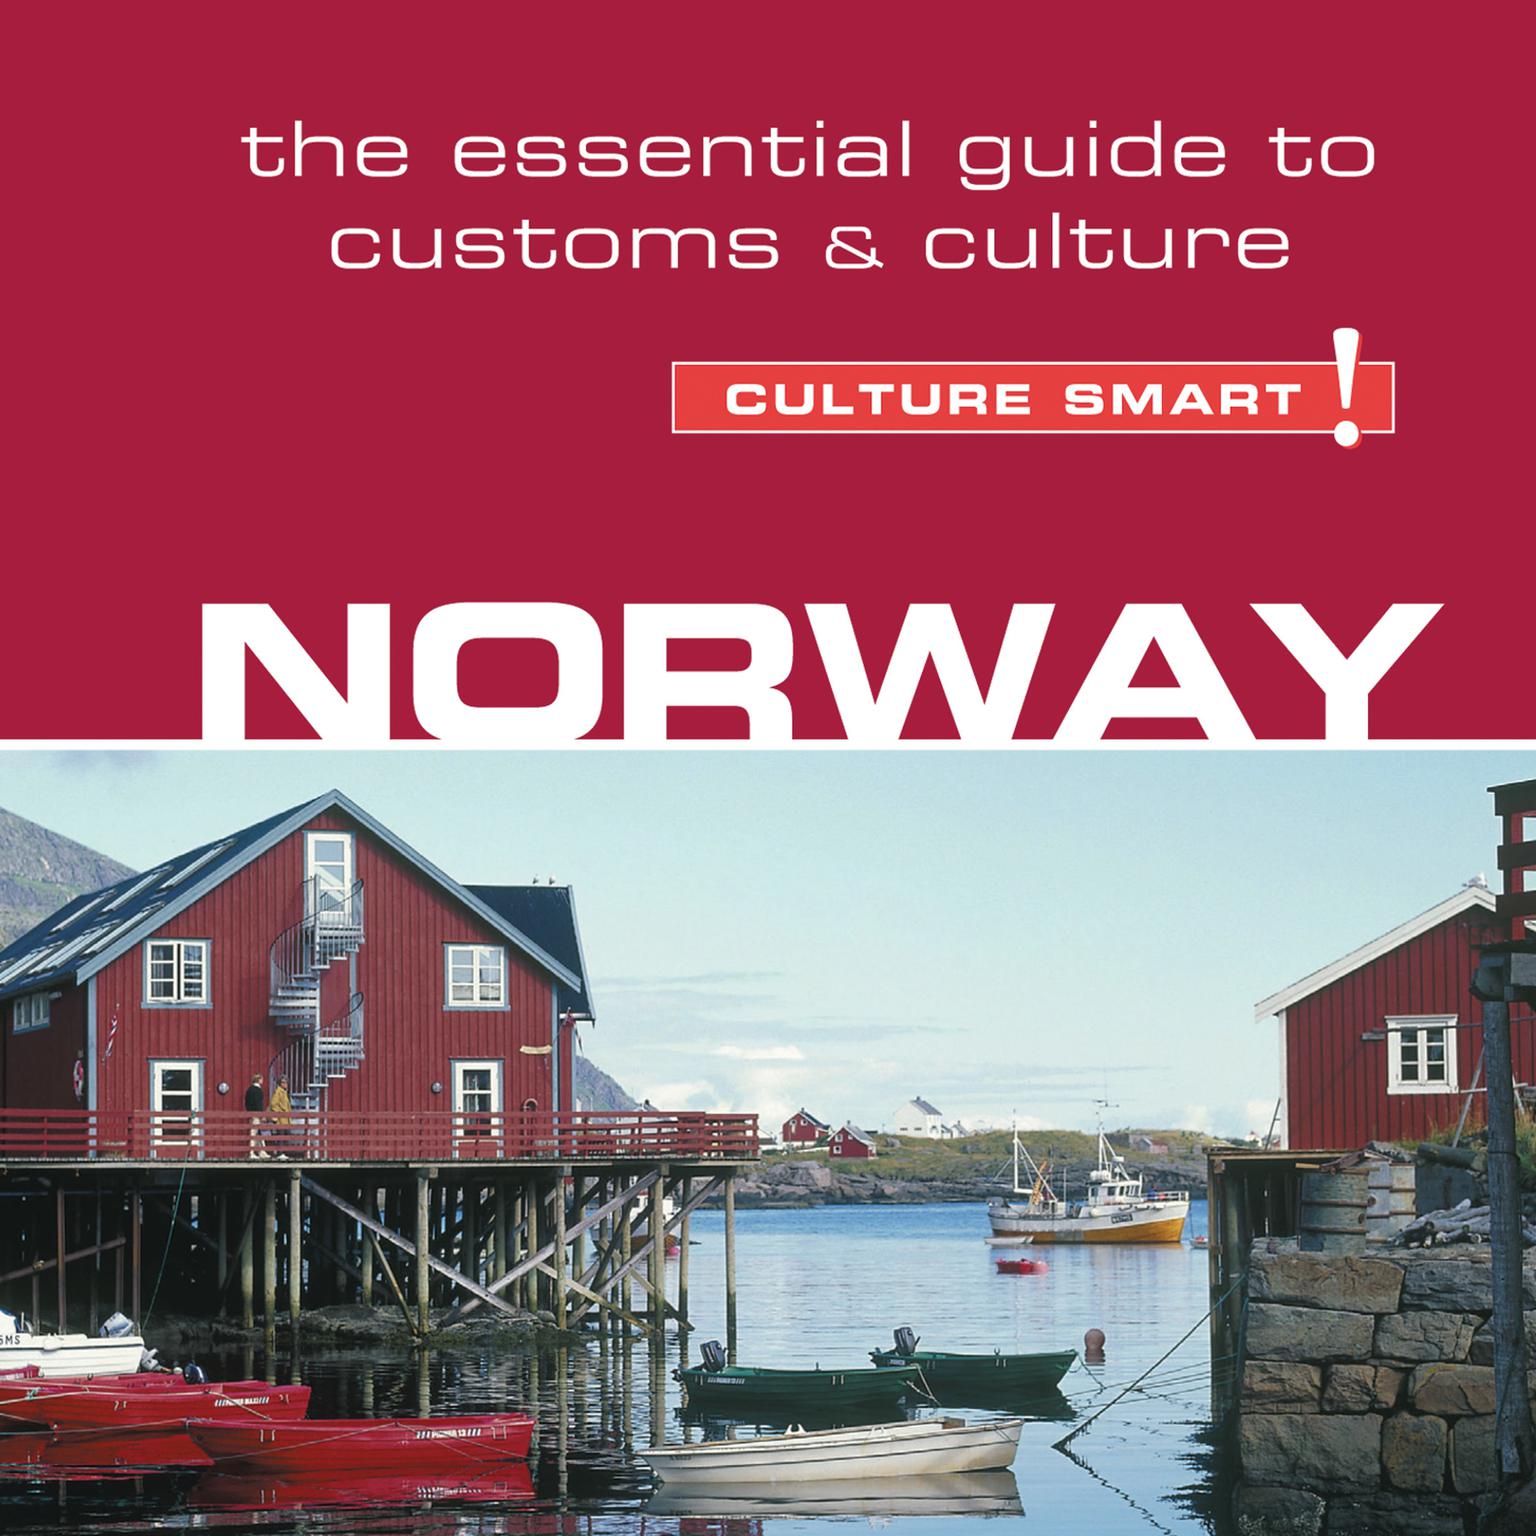 Norway - Culture Smart!: The Essential Guide to Customs & Culture Audiobook, by Linda March